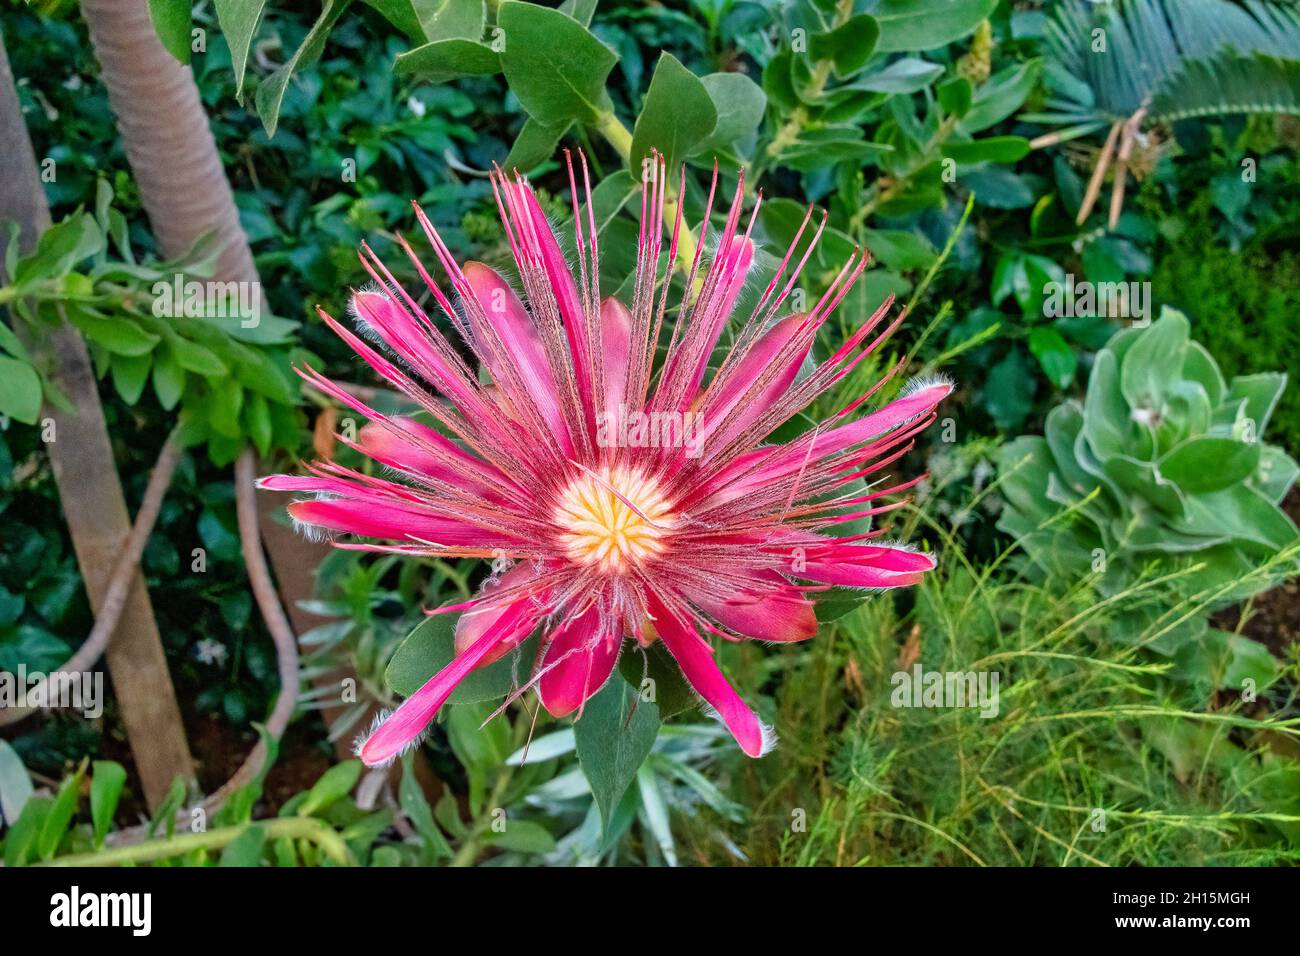 Potberg Protea pink flower bloom a member of the potbergensis plant species Stock Photo